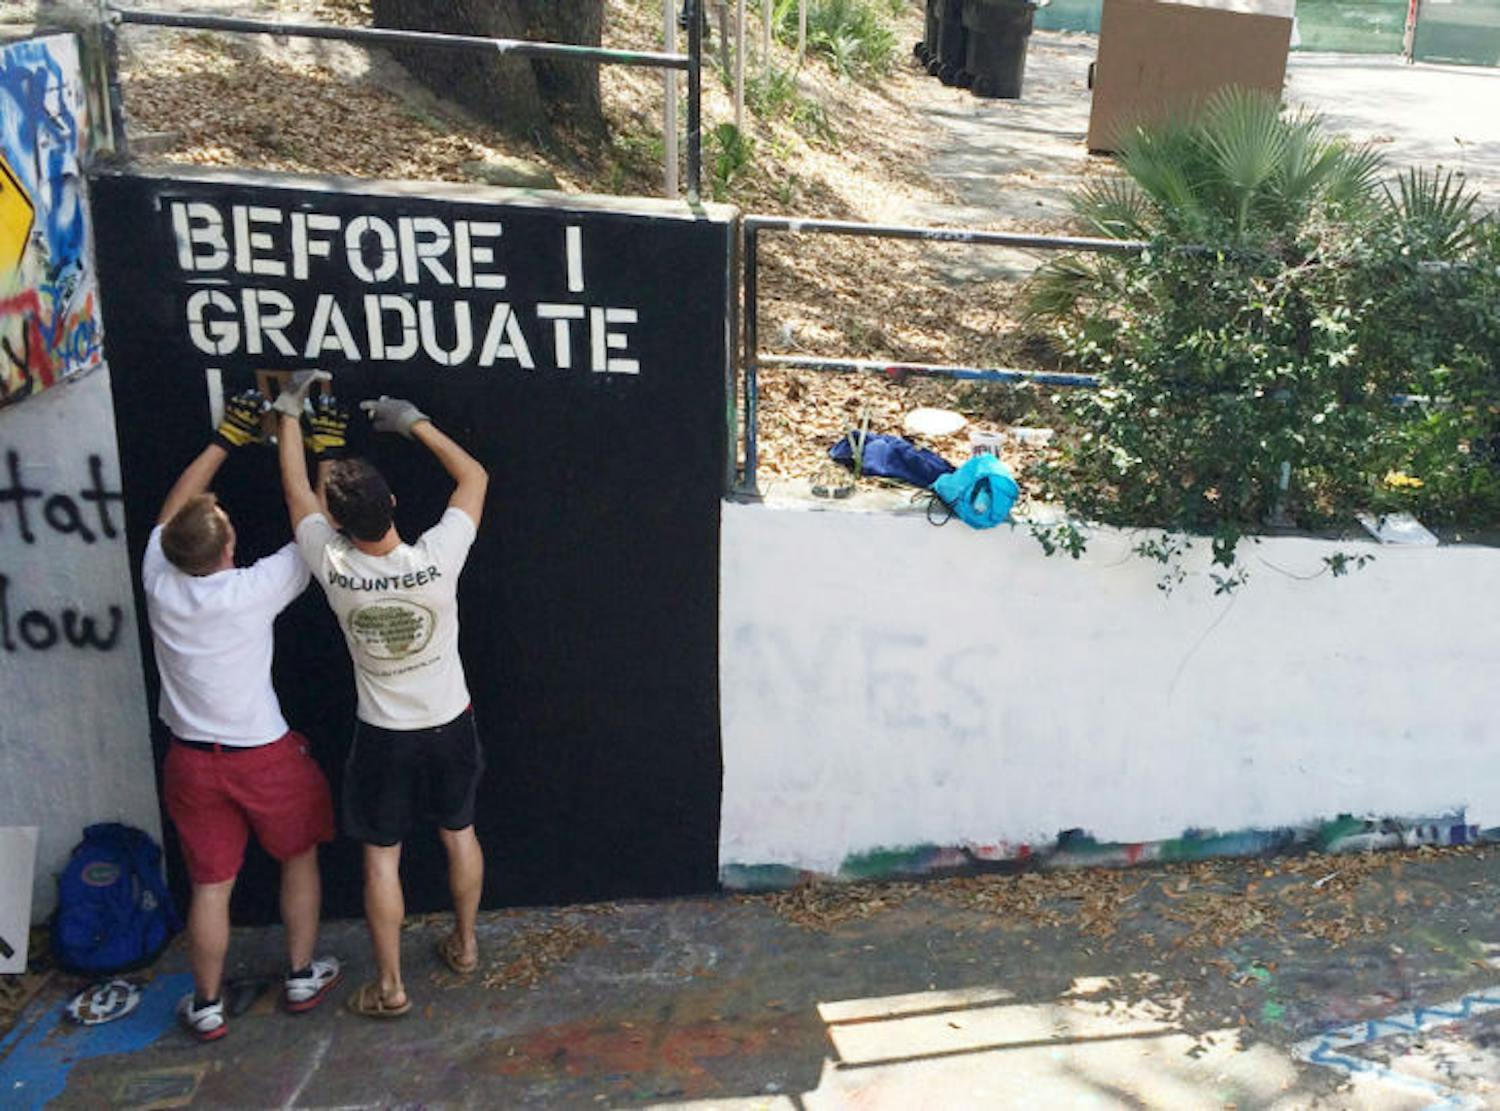 Danny Fry and Tyler Burris, president and treasurer of Humons respectively, spray paint individual stencil letters white onto a black background in the recently repainted Norman Hall tunnel. Humons is a student organization that promotes humans learning to live as one.